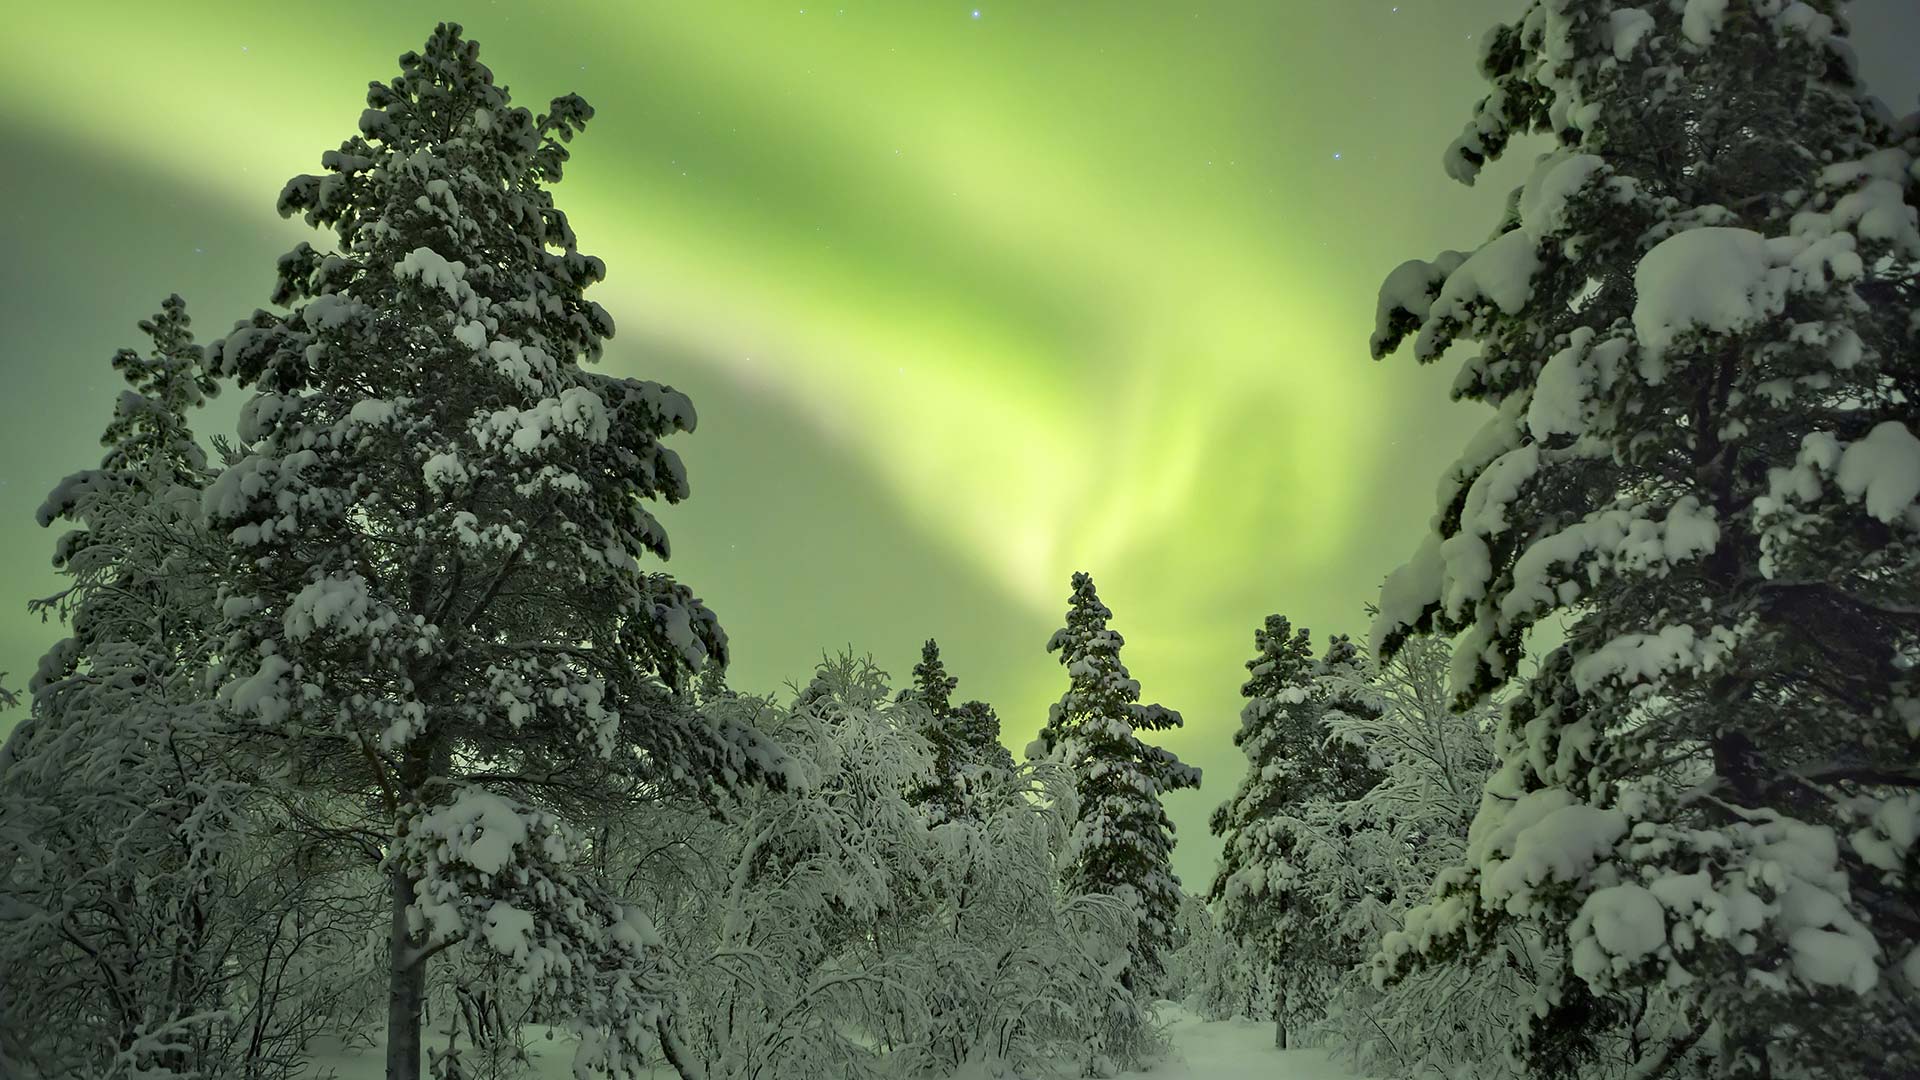 Northern lights above the forest in Finland